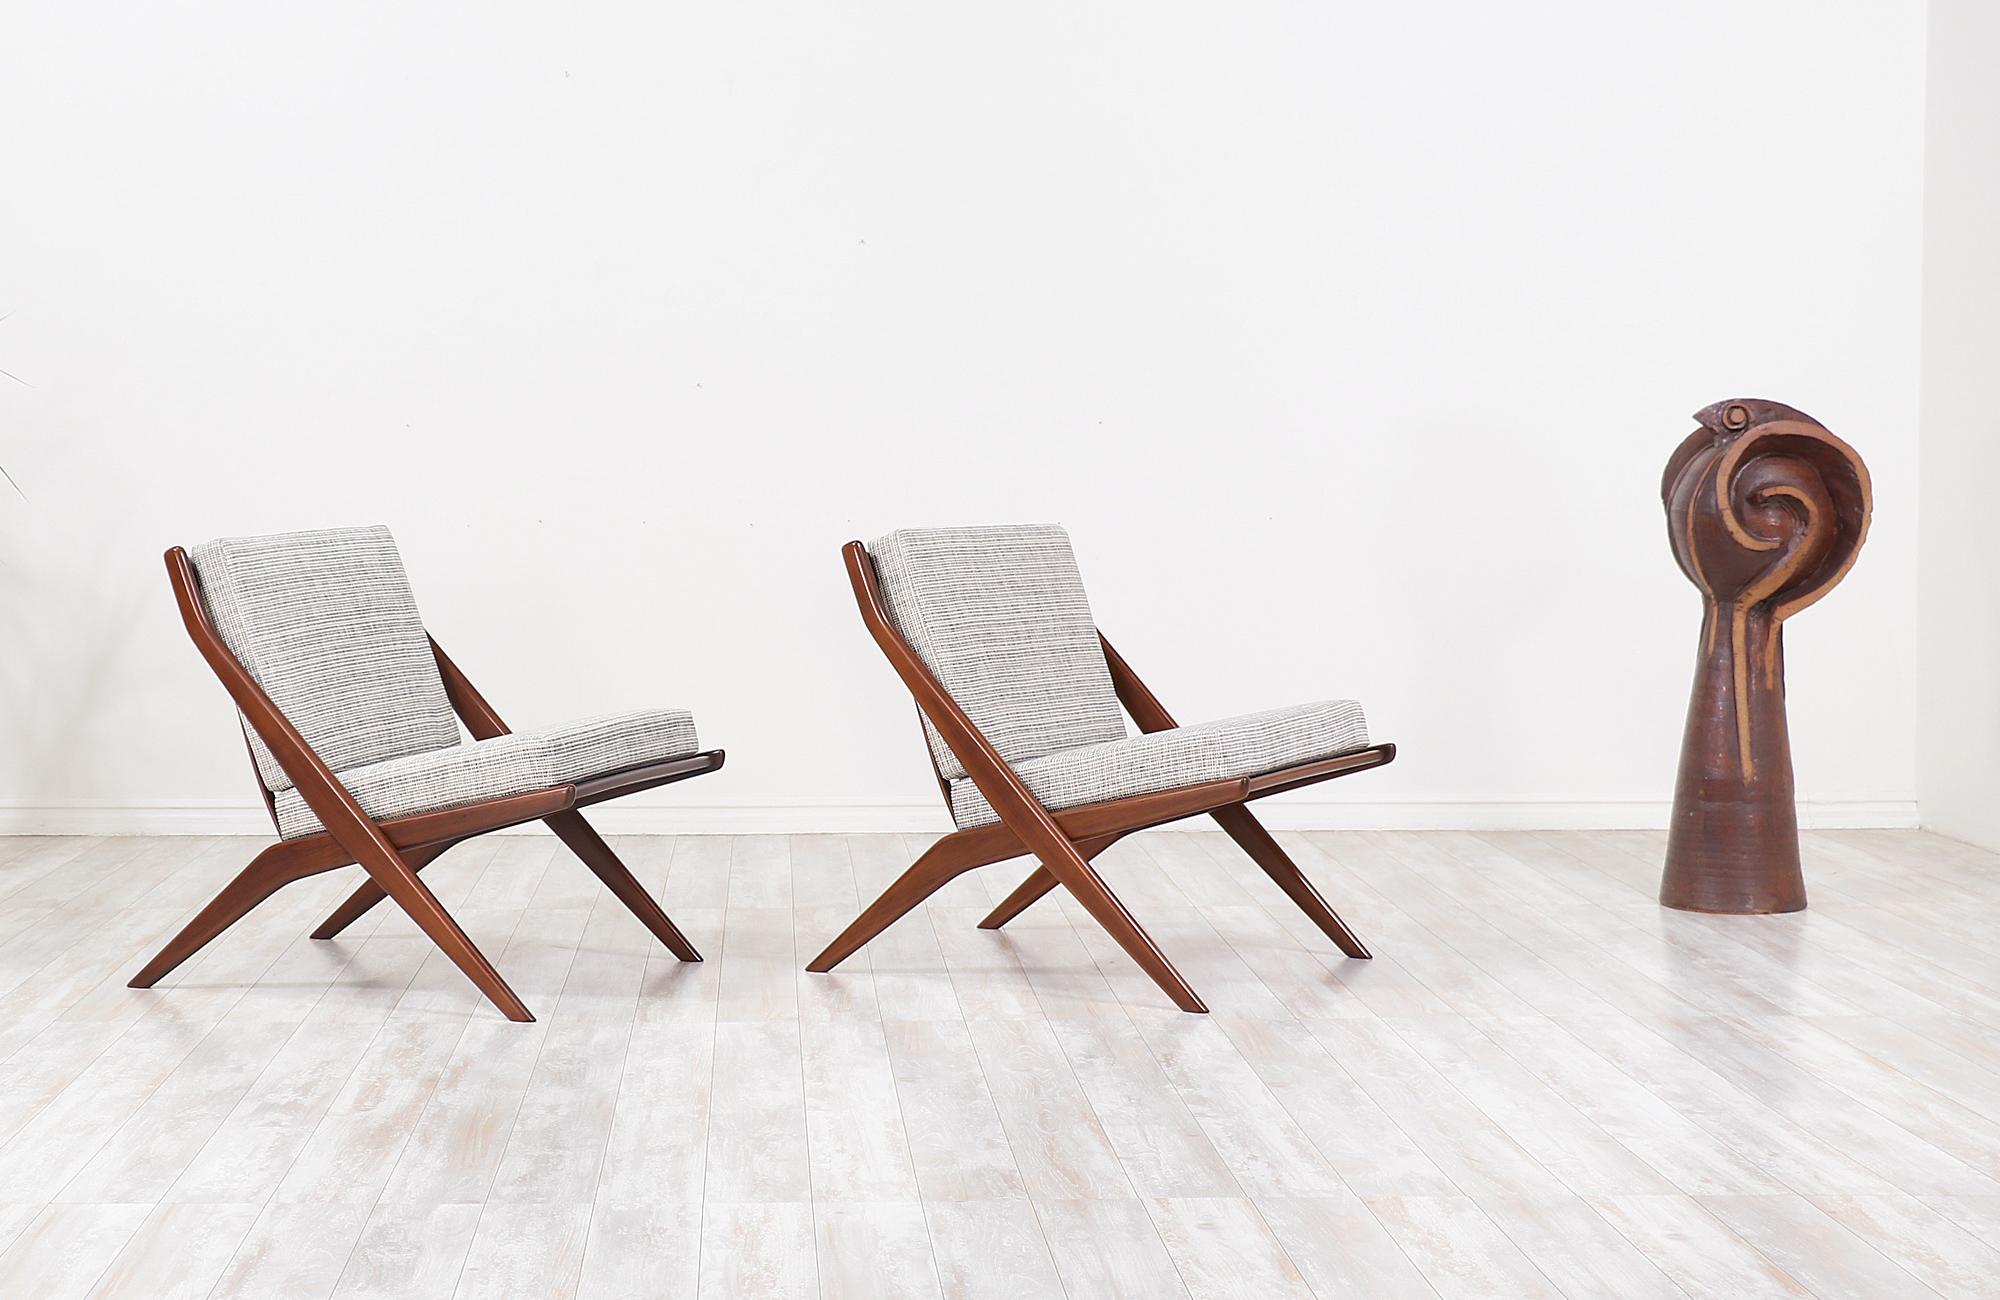 Pair of stylish modern lounge chairs designed in Sweden by Folke Ohlsson for DUX of Sweden circa 1950s. These Minimalist lounge chairs feature a scissor-like solid walnut-stained beechwood frame with new high-density foam cushions and light-colored